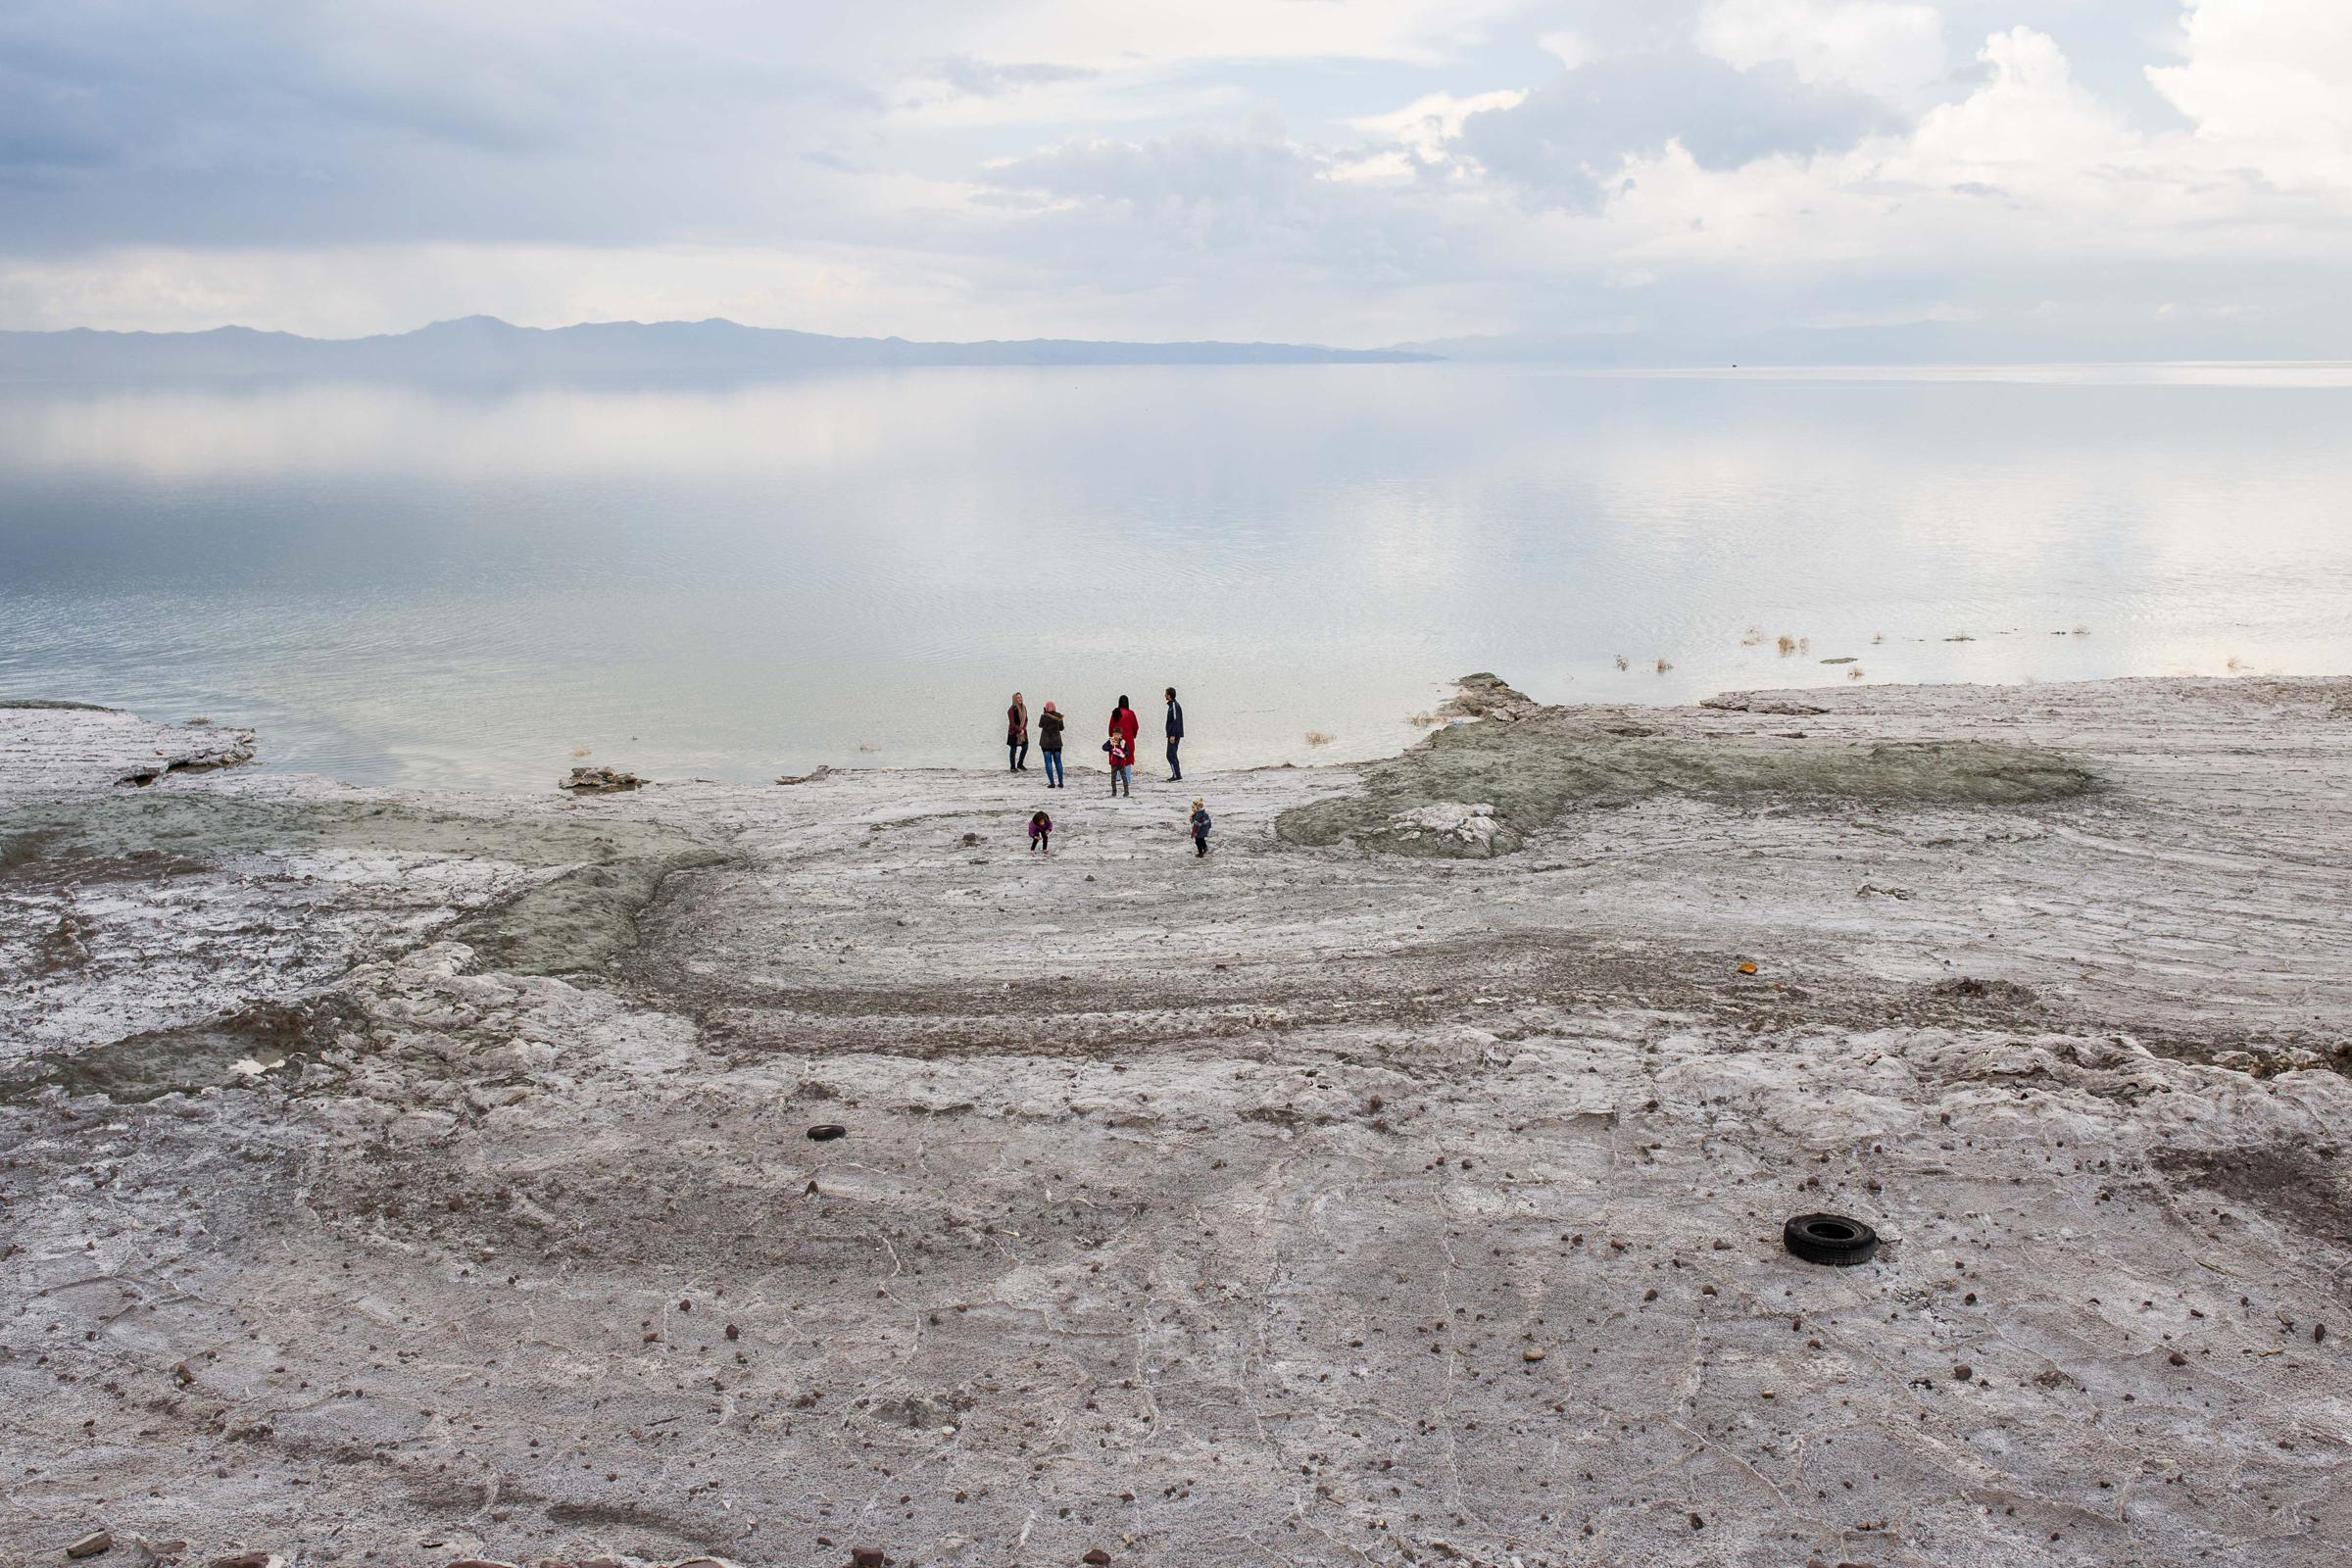  People came to visit lake Urmia and to take pictures of what remains of it. Lake Urmia is showing signs of recovery in some small parts because of heavy rainfalls. Lake Urmia, West -Azerbaijan, Iran. 2016 